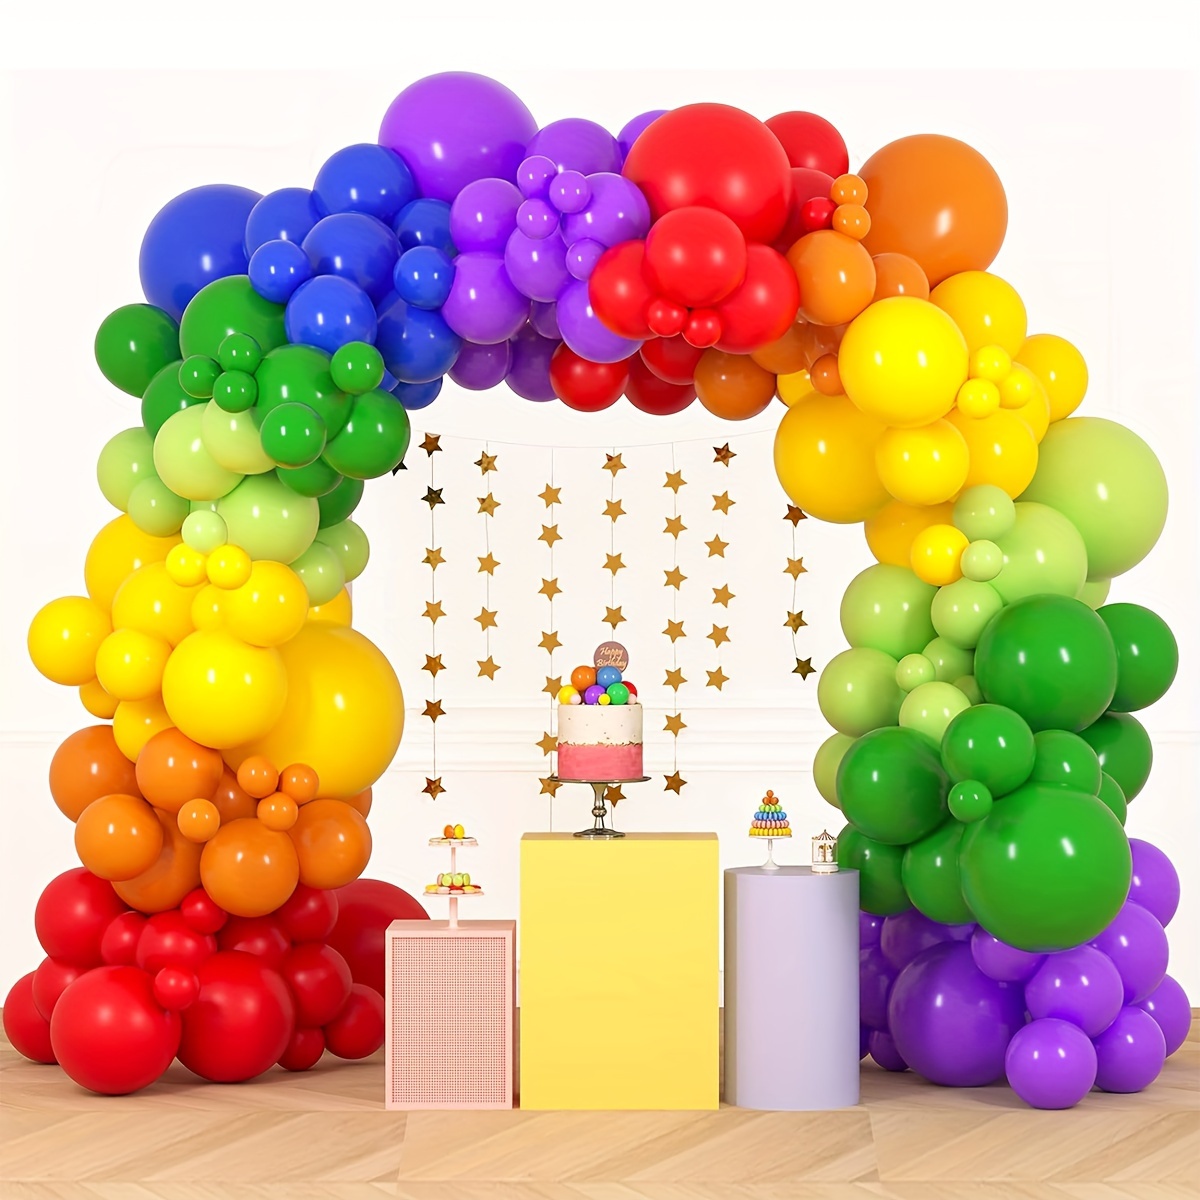 

142pcs Rainbow Balloon Garland Arch Kit, 7 Assorted Colors 5/10/12 Inch Latex Balloons For Birthday Party Baby Shower Wedding Anniversary Decoration